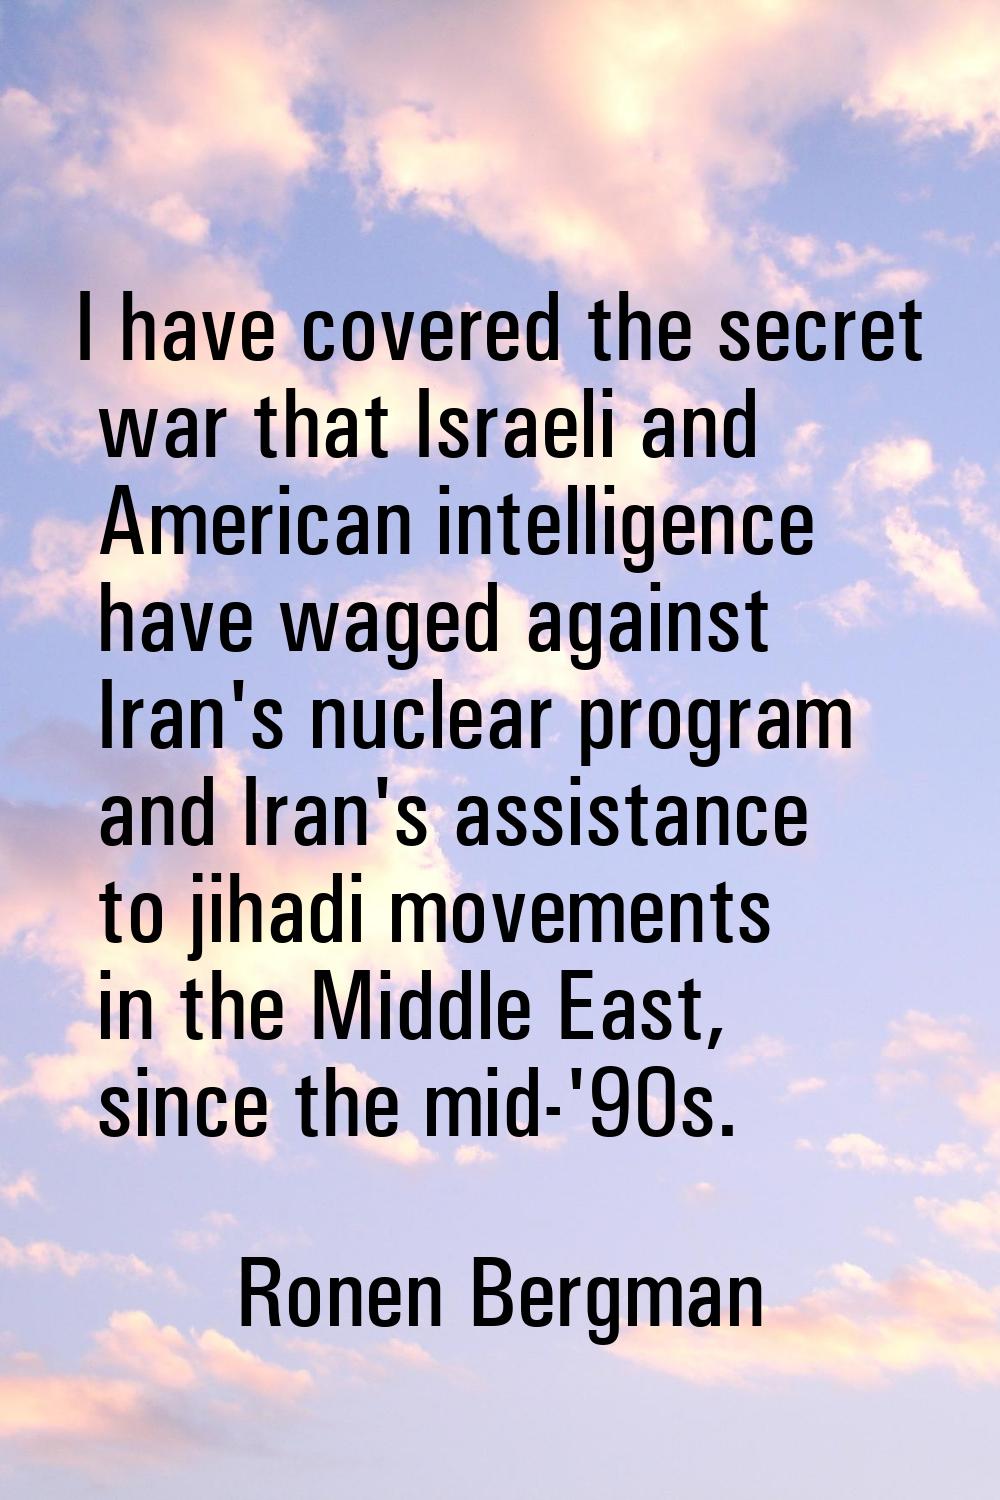 I have covered the secret war that Israeli and American intelligence have waged against Iran's nucl